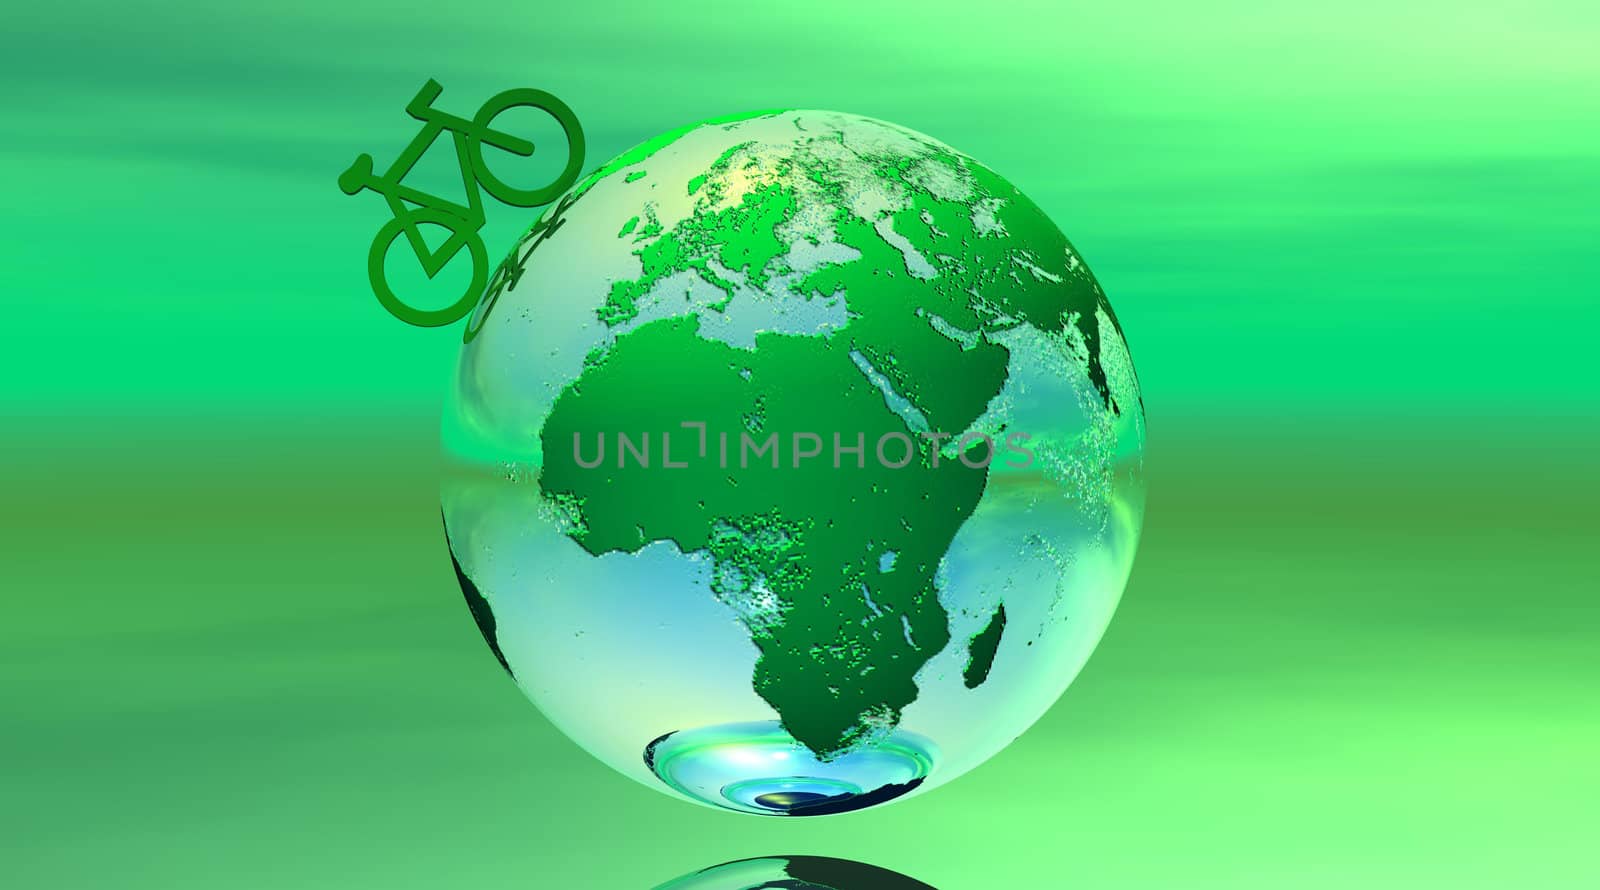 Bicycle on earth in green ecological background